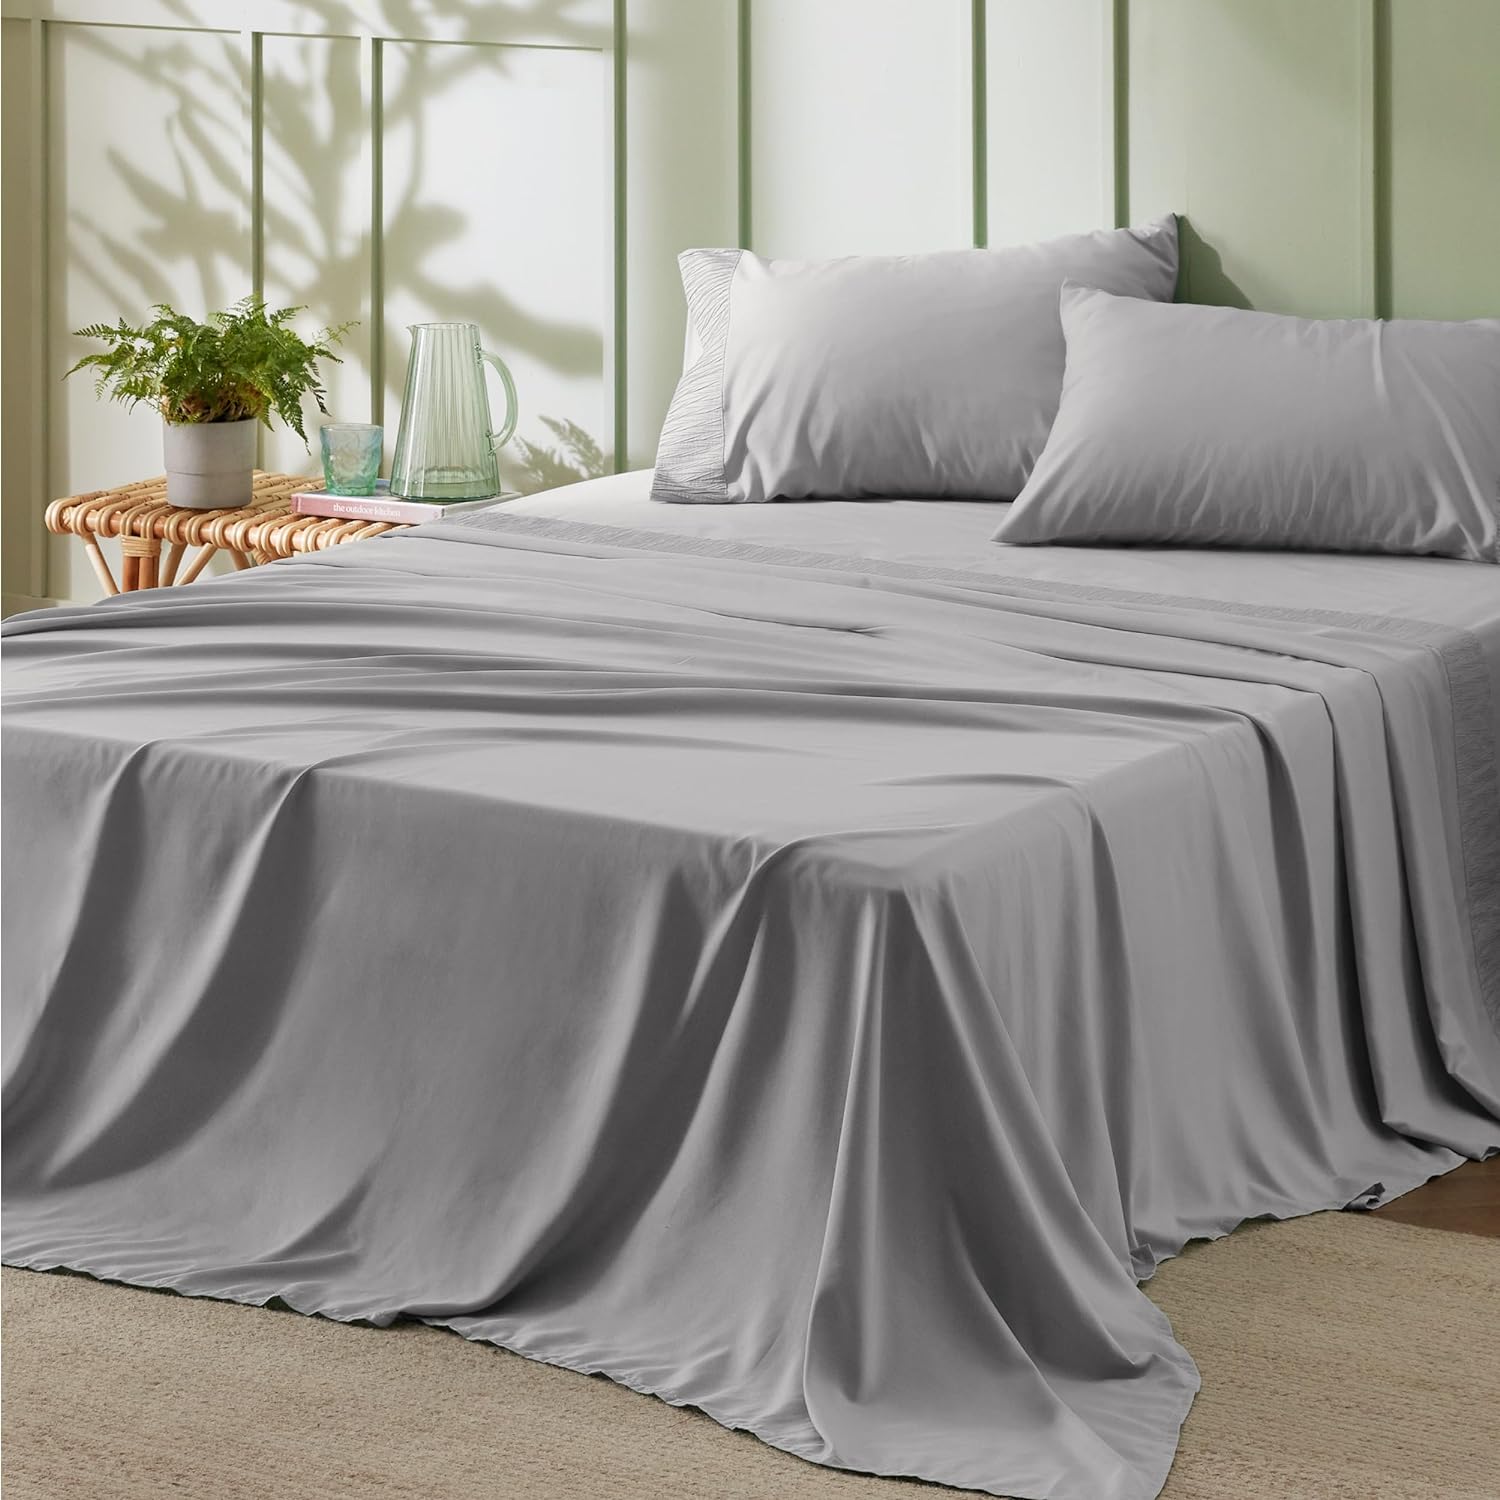 Bedsure Full Size Sheet Sets - Soft Sheets for Full Size Bed, 4 Pieces Hotel Luxury Grey Sheets Full, Easy Care Polyester Microfiber Cooling Bed Sheet Set